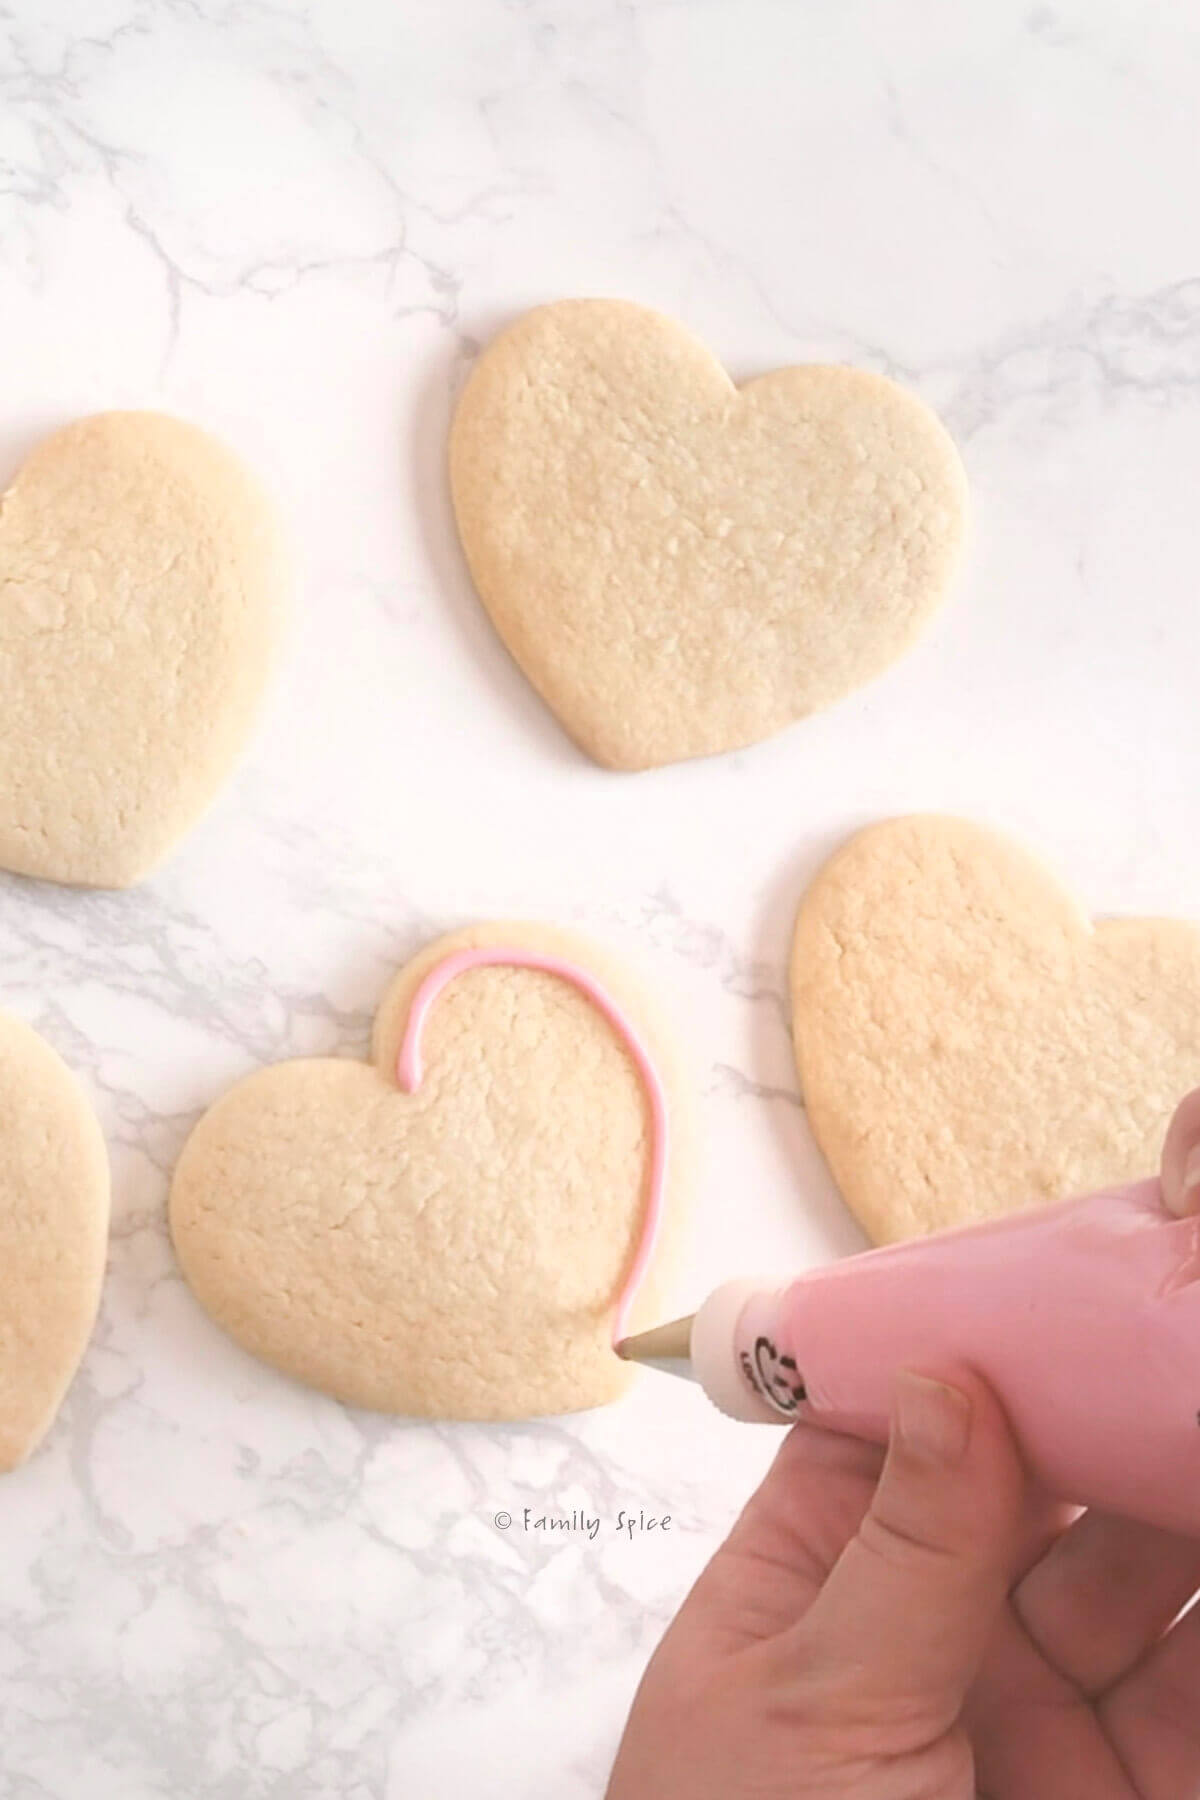 Piping pink royal icing onto a heart sugar cookie